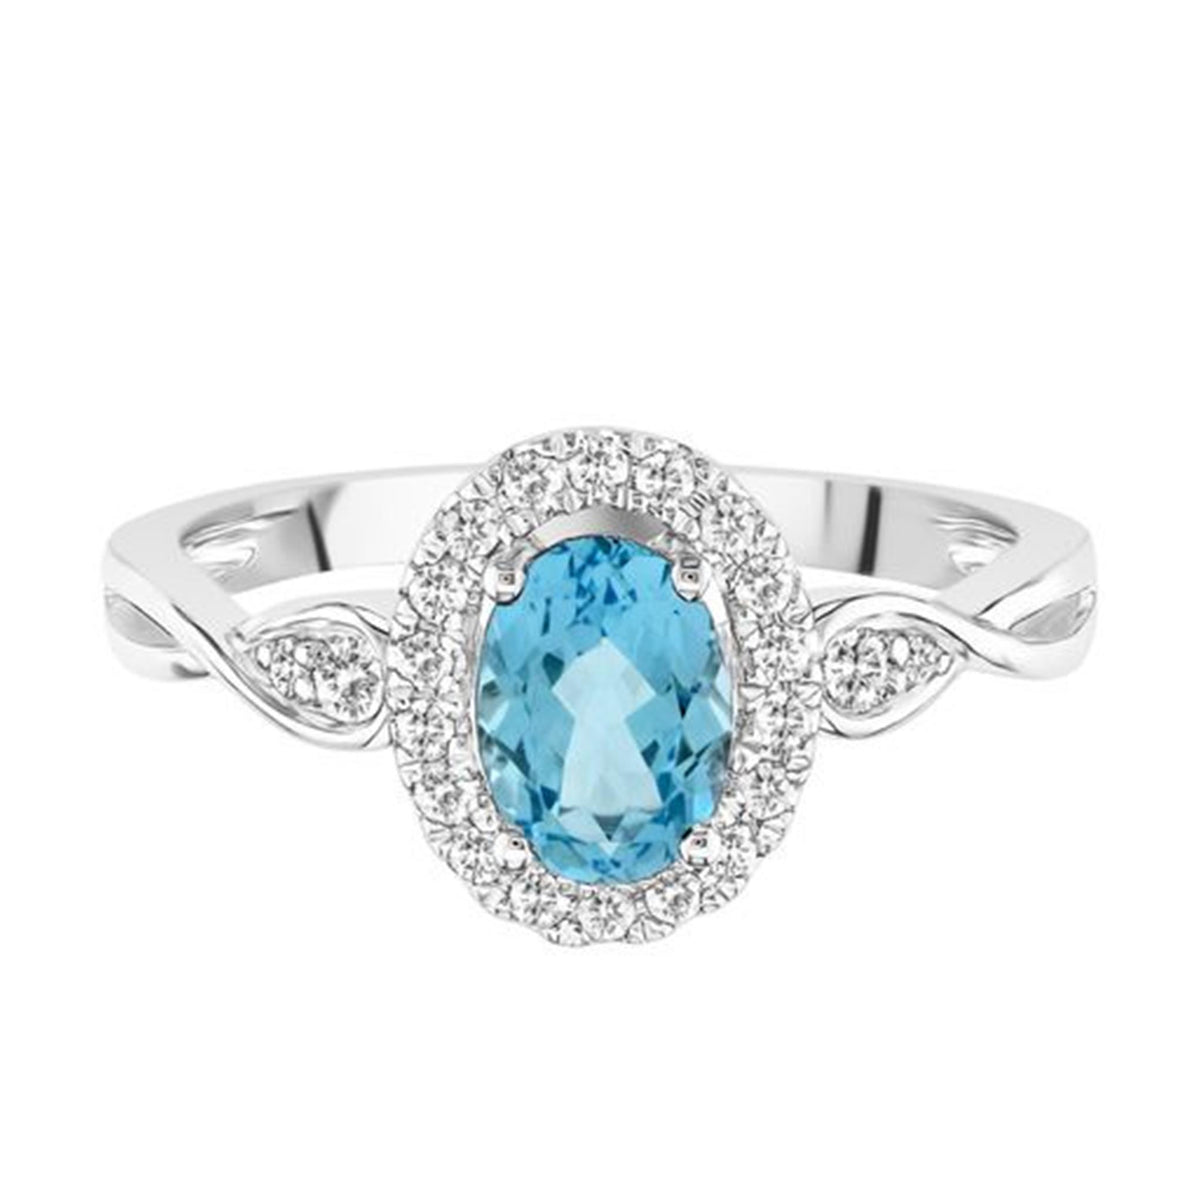 10Kt White Gold Halo Gemstone Ring With 0.97ct Blue Topaz